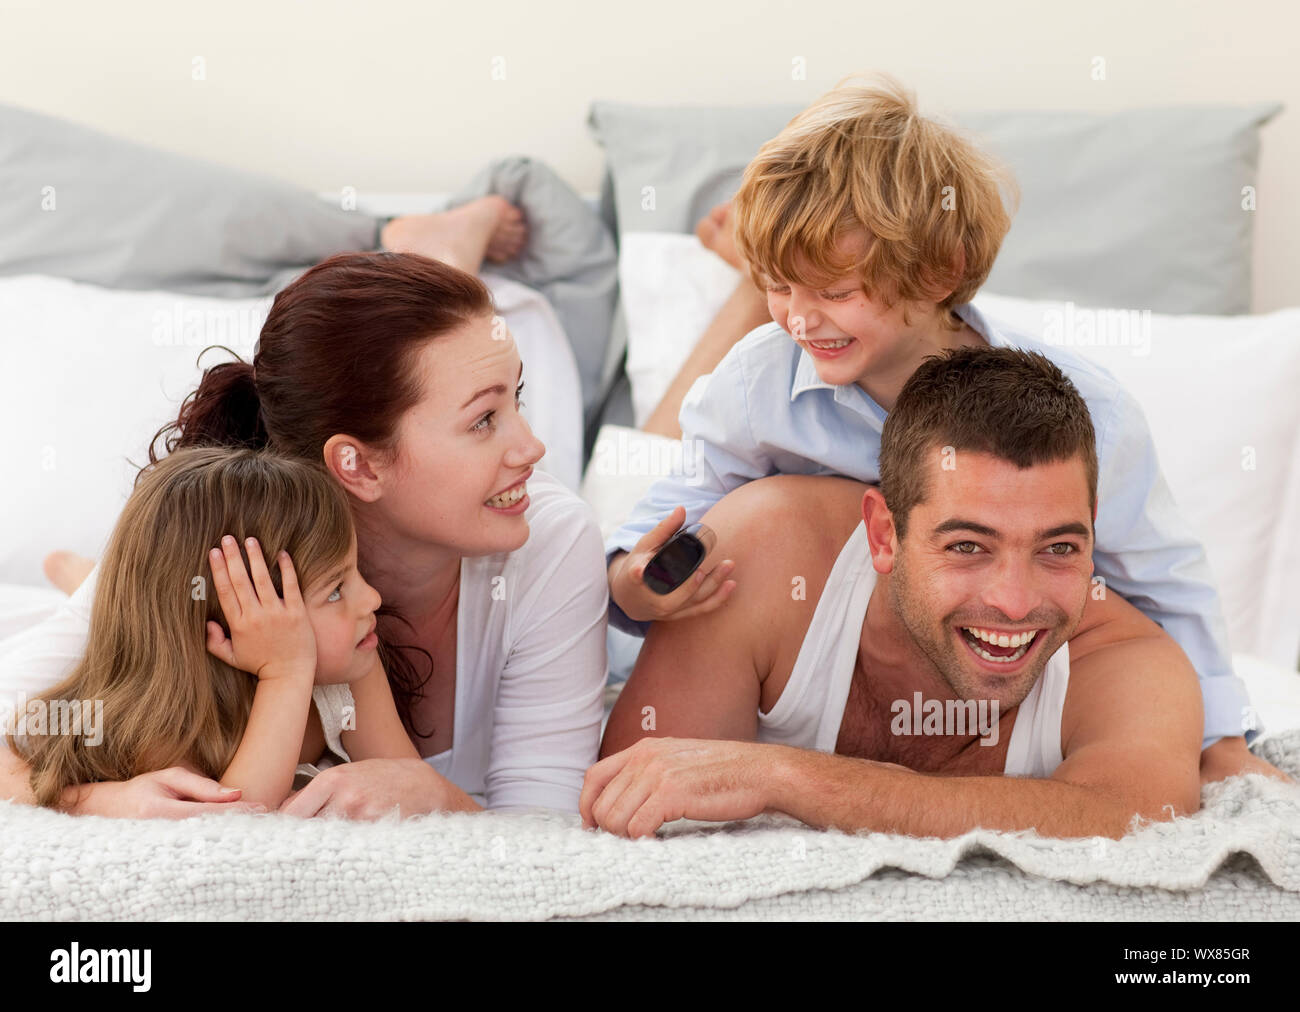 Family lying in bed watching television and son using a remote Stock Photo